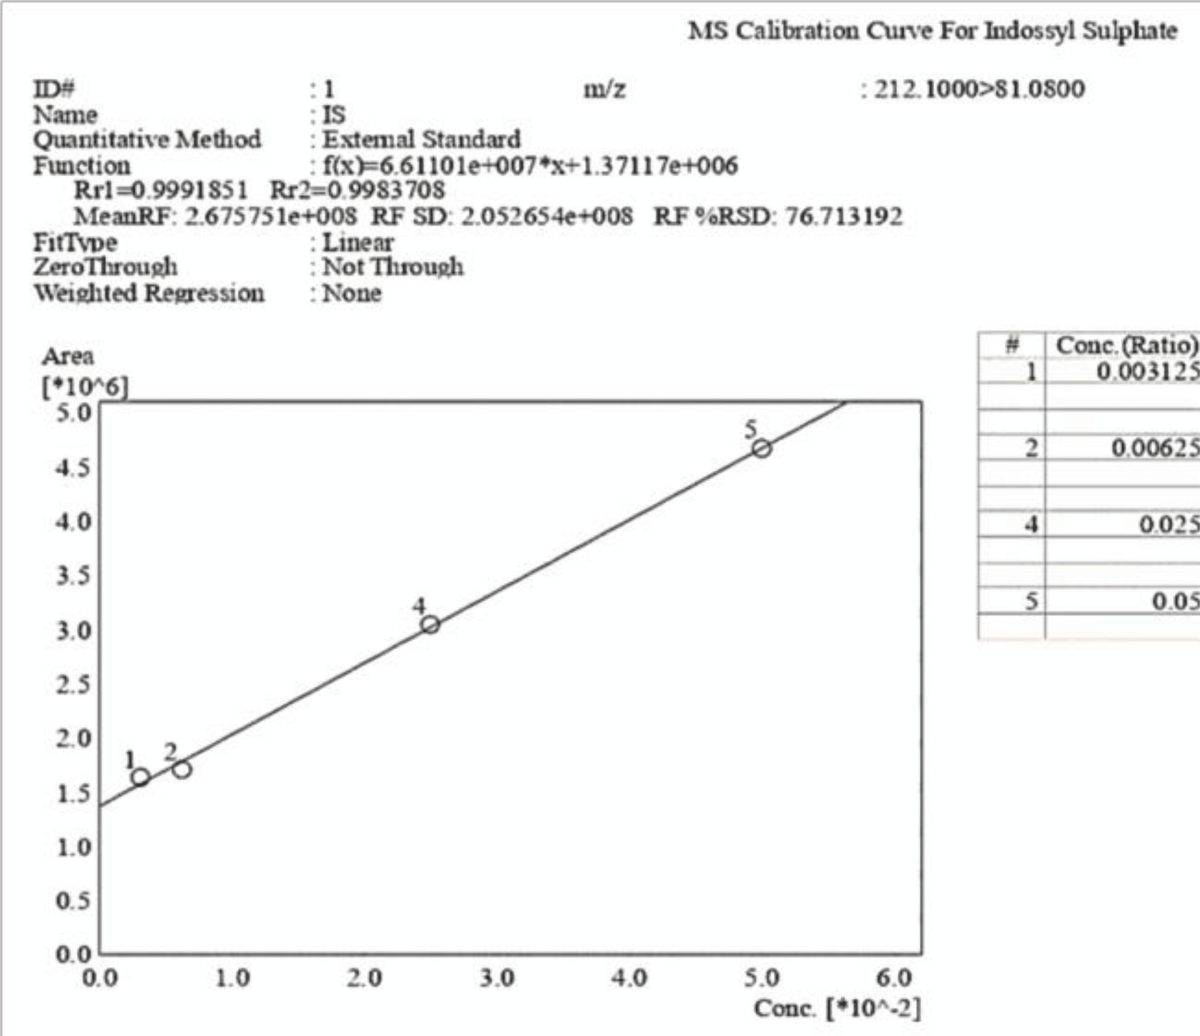 Calibration curve of Indossyl Sulphate obtained via LC-MS pertaining the transition m/z: 212.1000  81.0800. The picture also reports the equation of the calibration curve as well as the correlation coefficient R2. The curve was created using the Quant Browser on the LabSolutions WS Software.